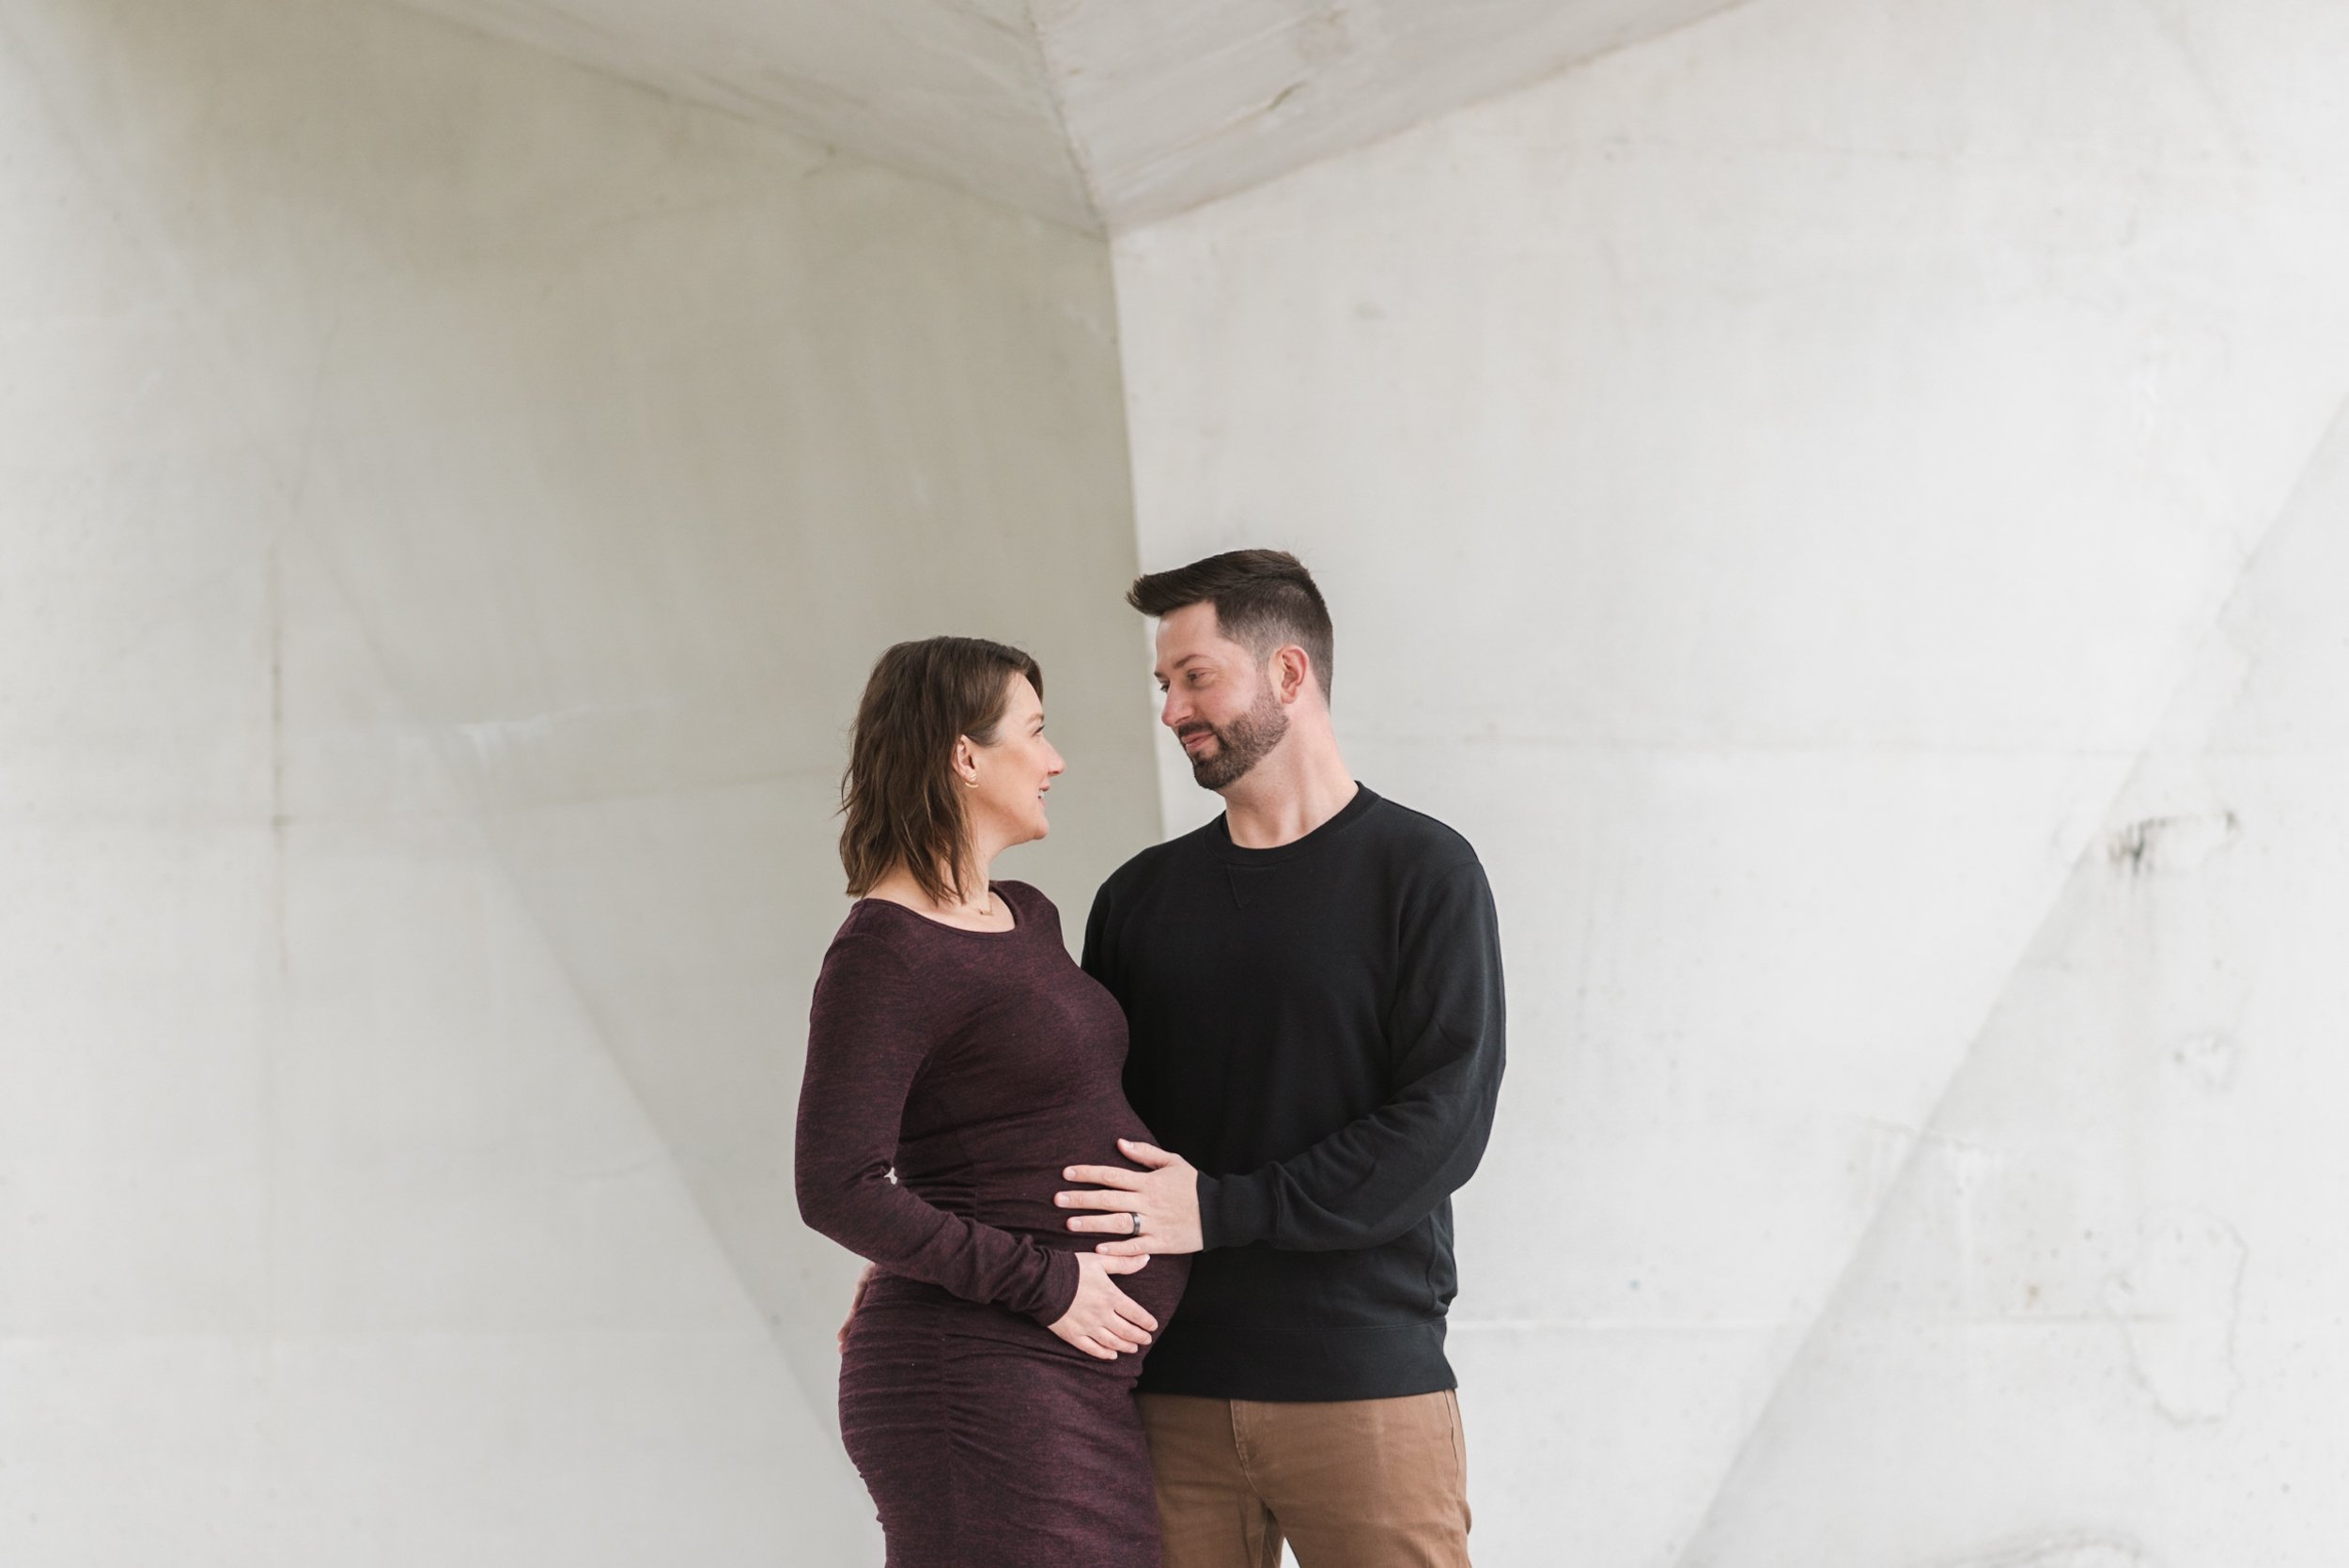 Pregnant woman with husband against white background